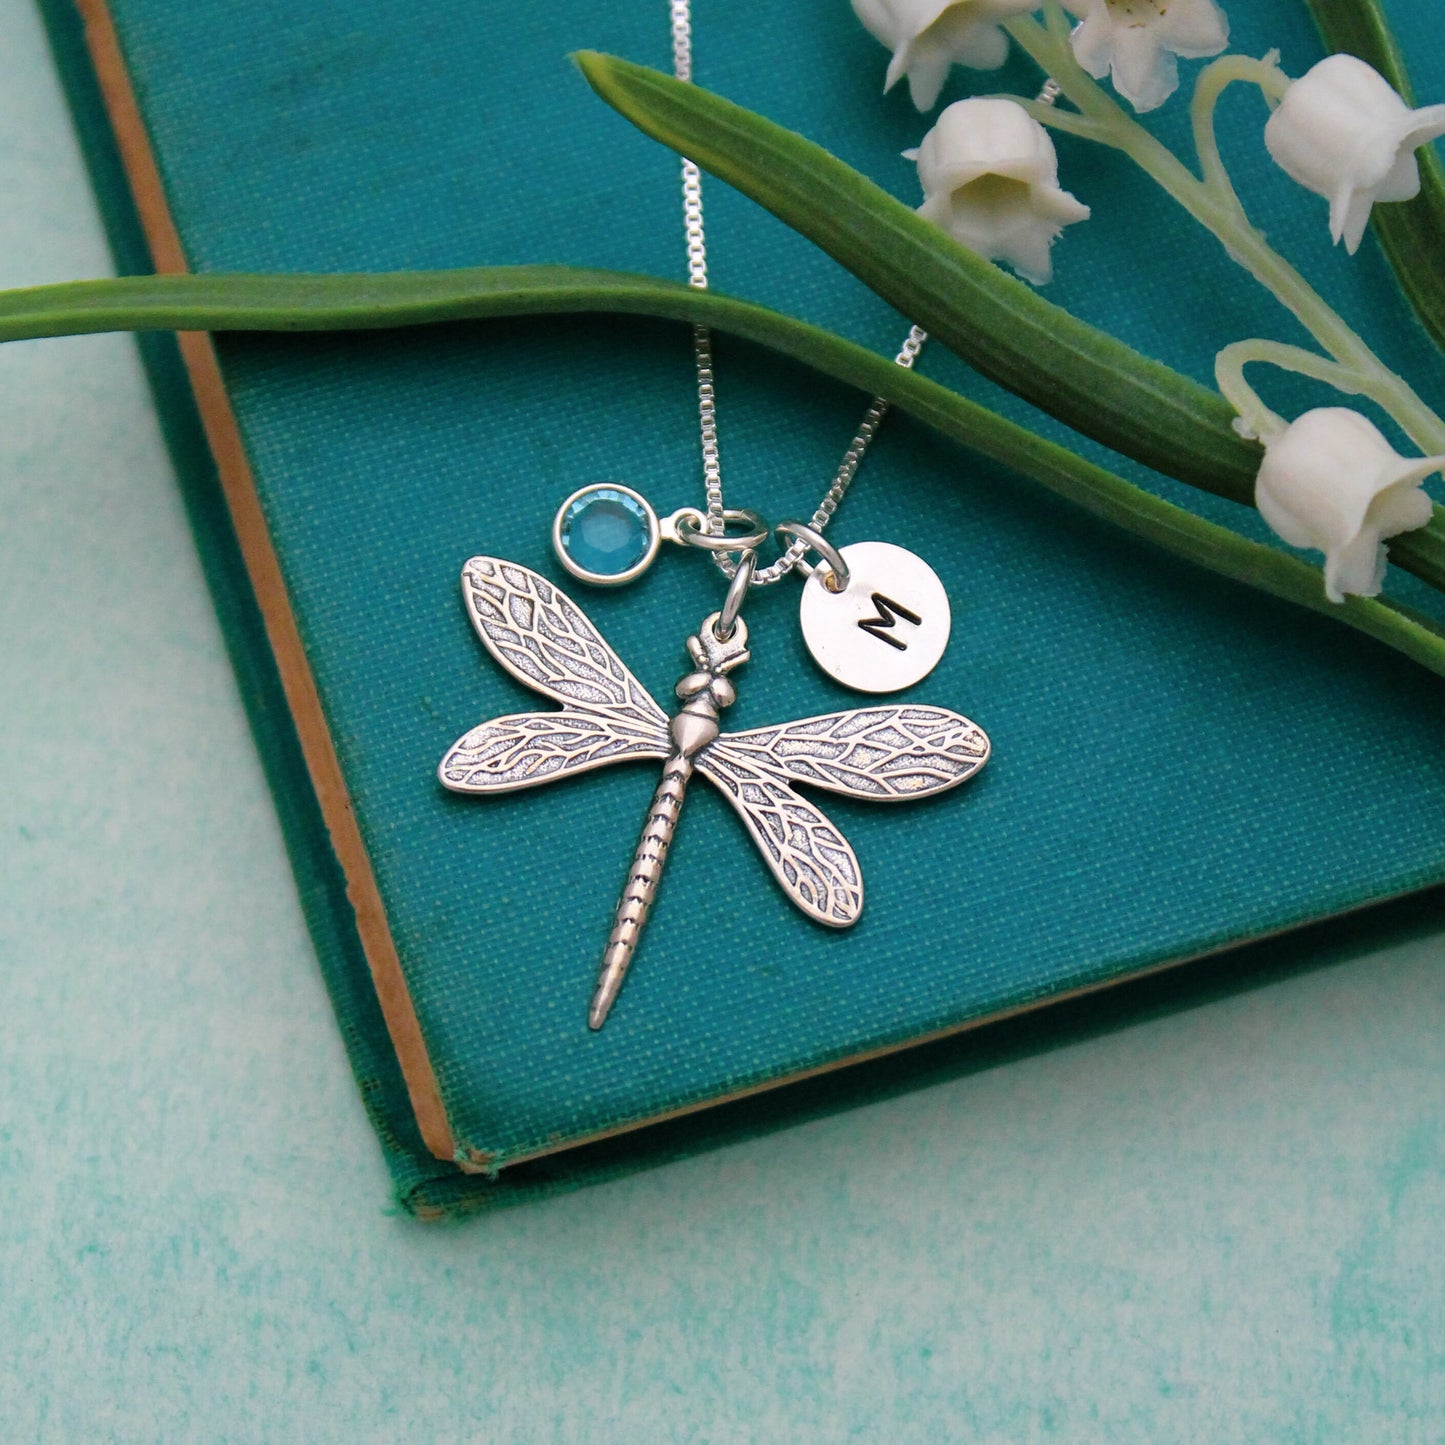 Dragonfly Necklace in Sterling Silver with Initial & Birthstone, Birthstone Birthday Gift, Personalized Gift, Initial March Birthstone Gift